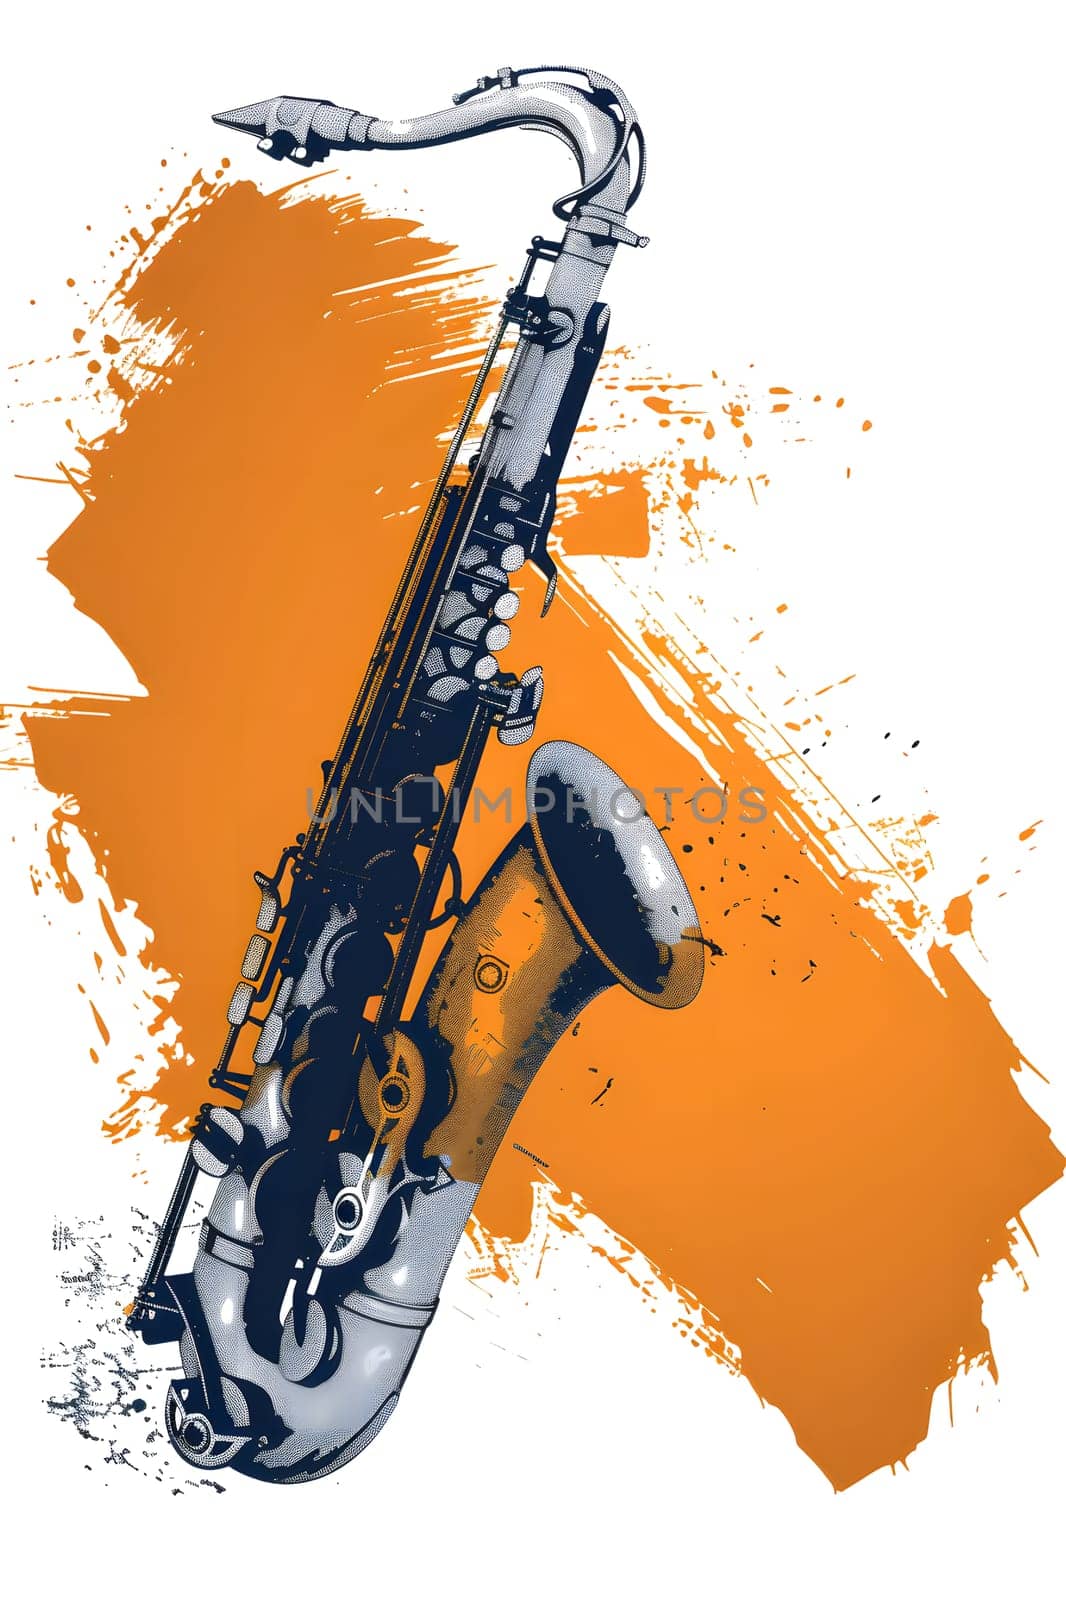 A vibrant painting of a saxophone on an orange background using fluid paint, capturing the essence of this reed instrument through art and color